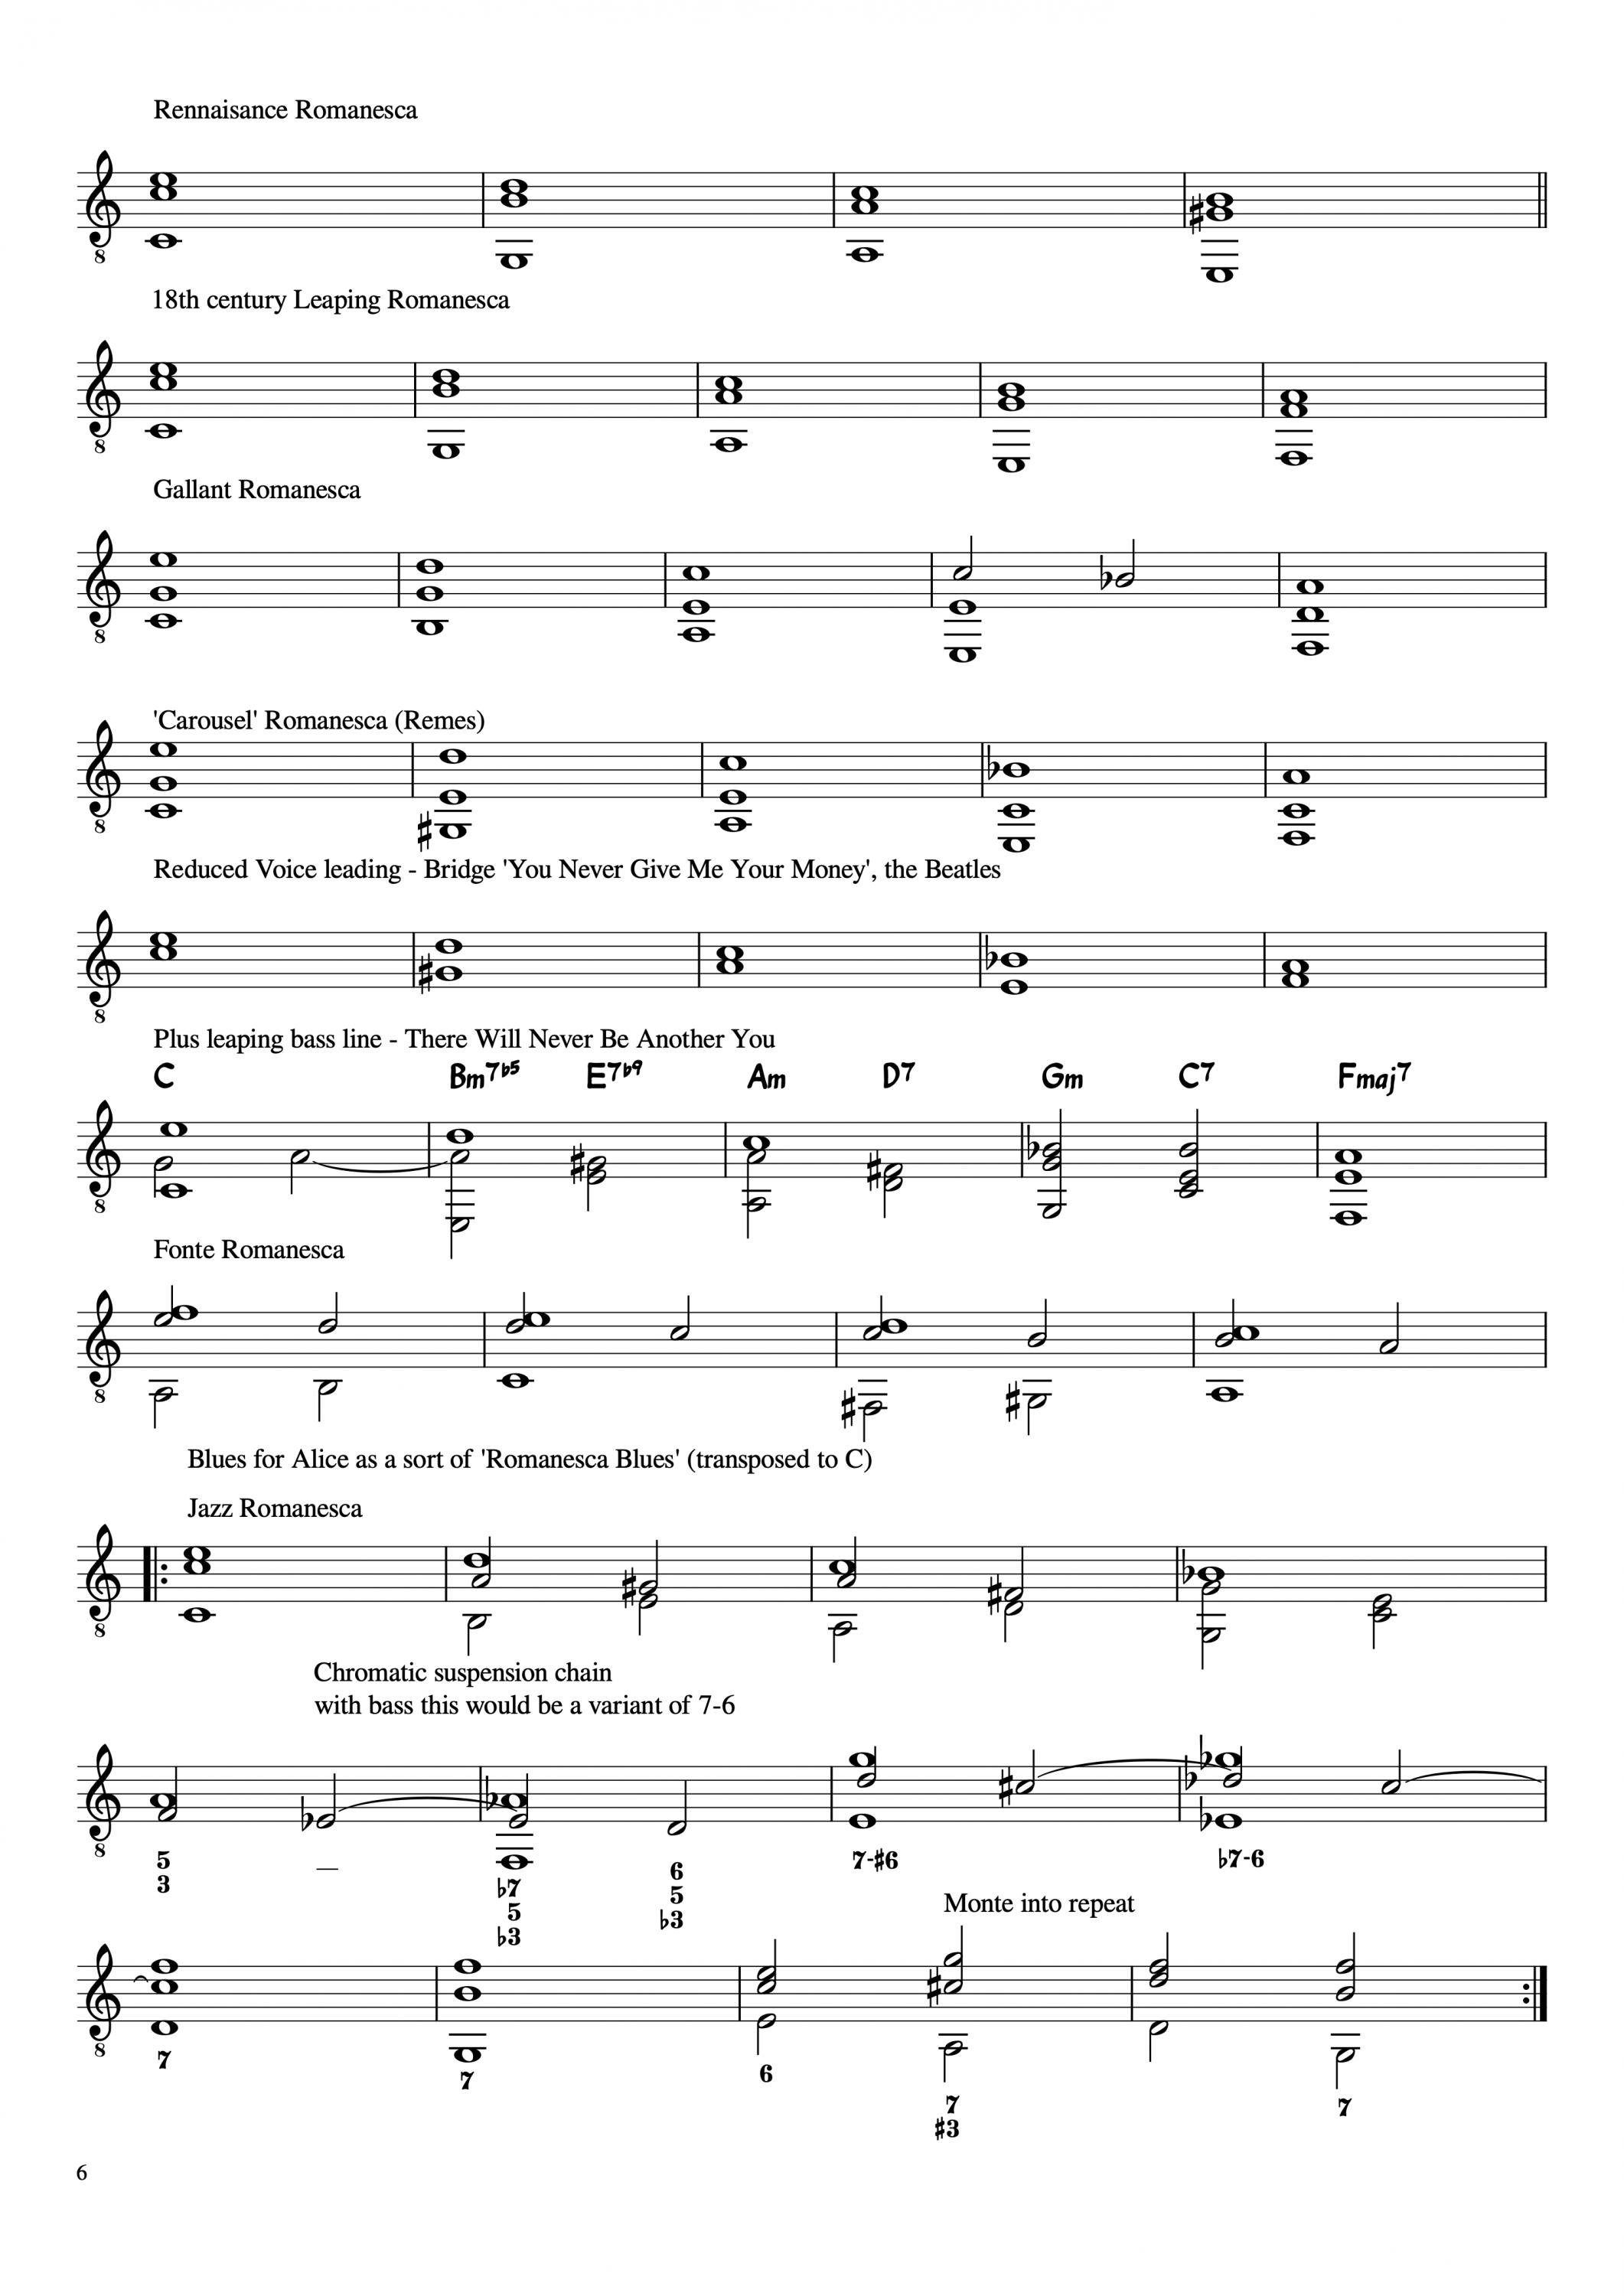 Classical schemata (counterpoint skeletons) in jazz - what I've been working on-schemata_for_jazz-png-6-jpg